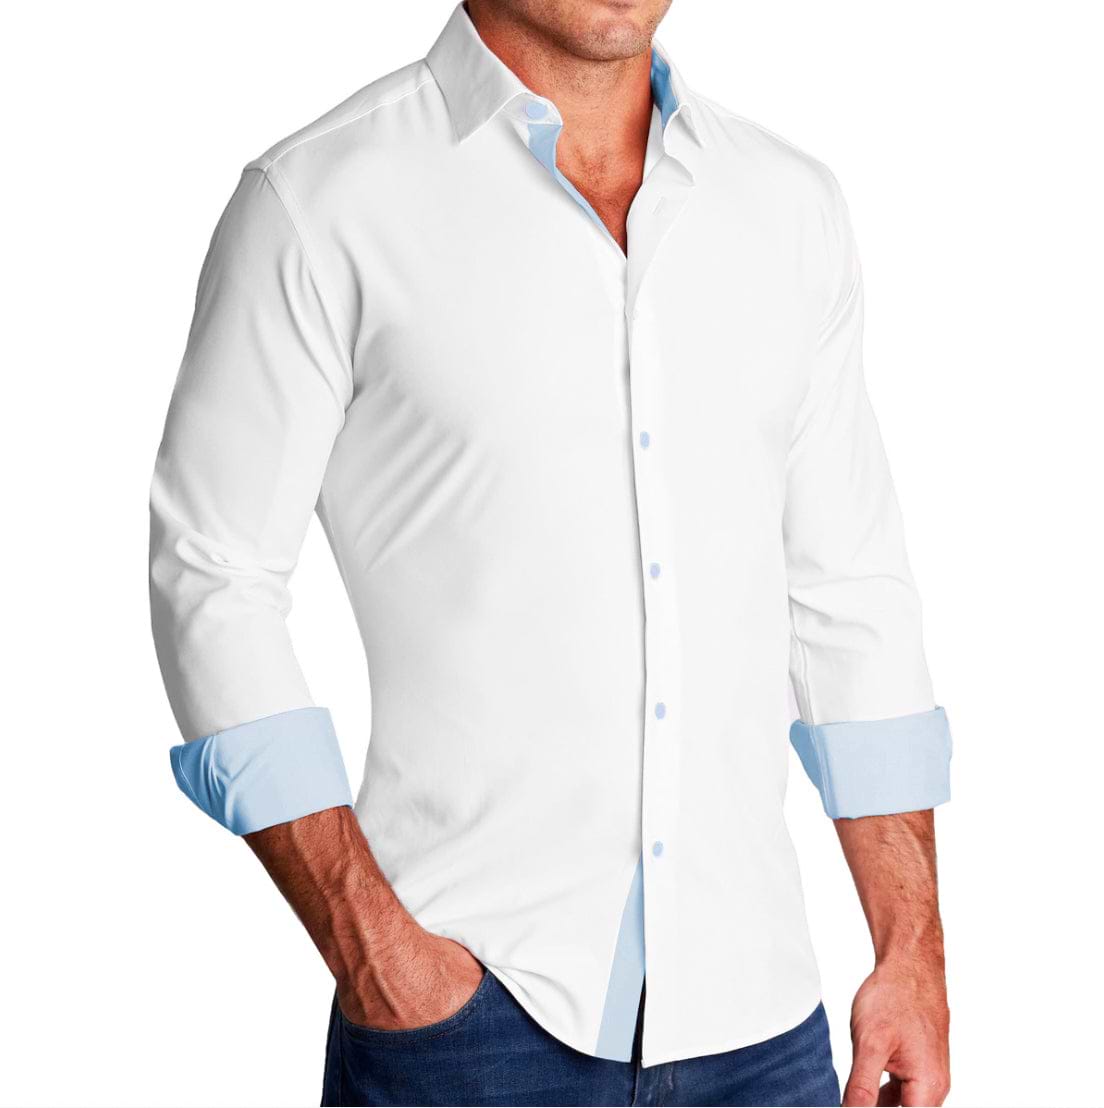 "The Briggs" Solid White with Light Blue Accents - Classic Fit